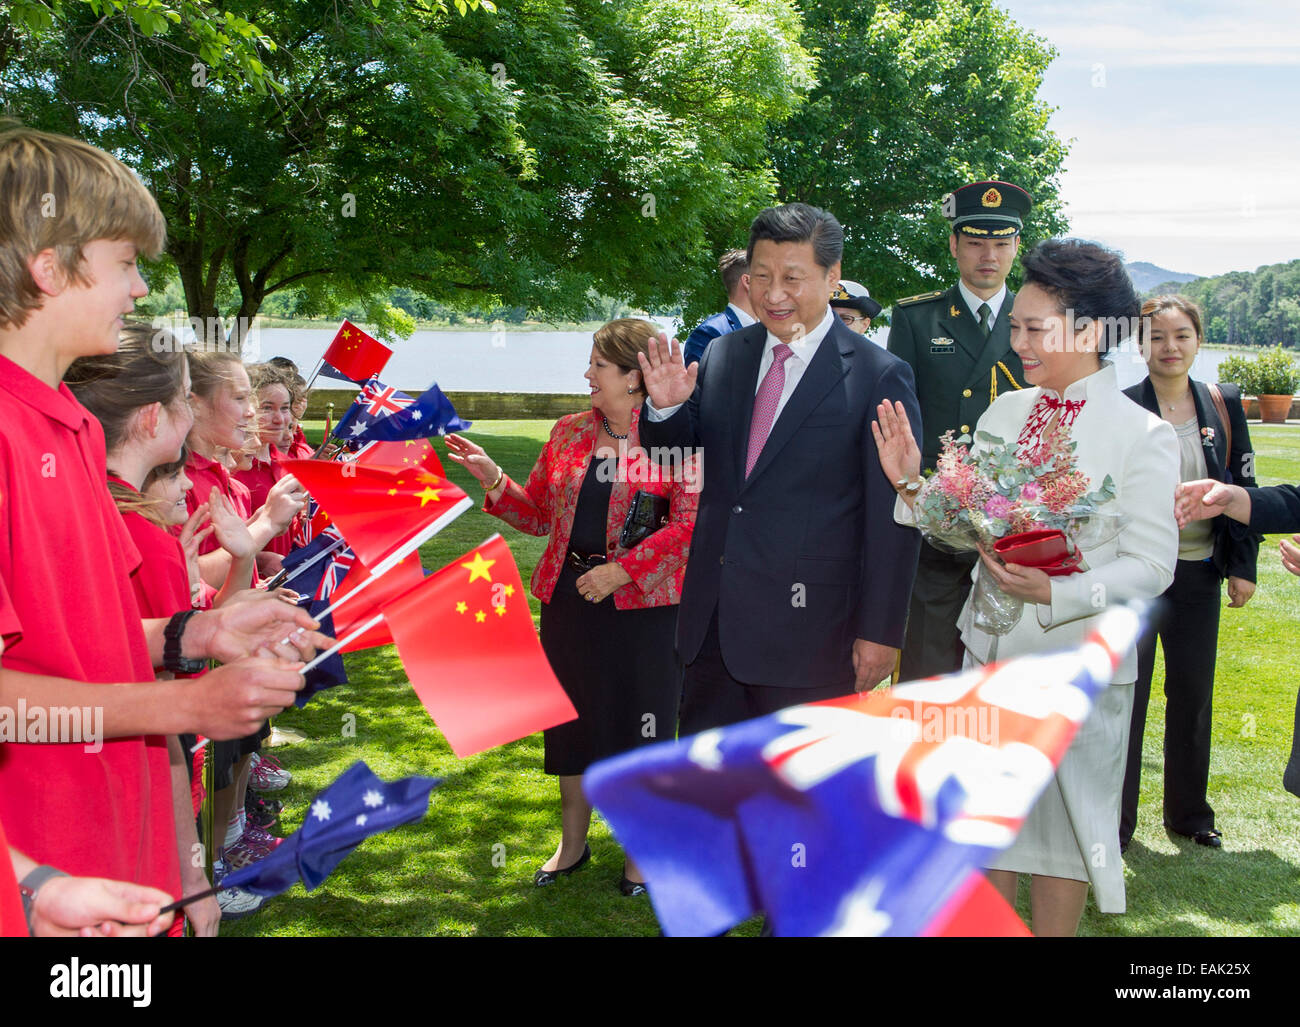 (141117) -- CANBERRA, Nov. 17, 2014 (Xinhua) -- Chinese President Xi Jinping and his wife Peng Liyuan are welcomed before his meeting with Australian Governor-General Peter Cosgrove in Canberra, capital of Australia, Nov. 17, 2014. (Xinhua/Xie Huanchi) (wjq) Stock Photo